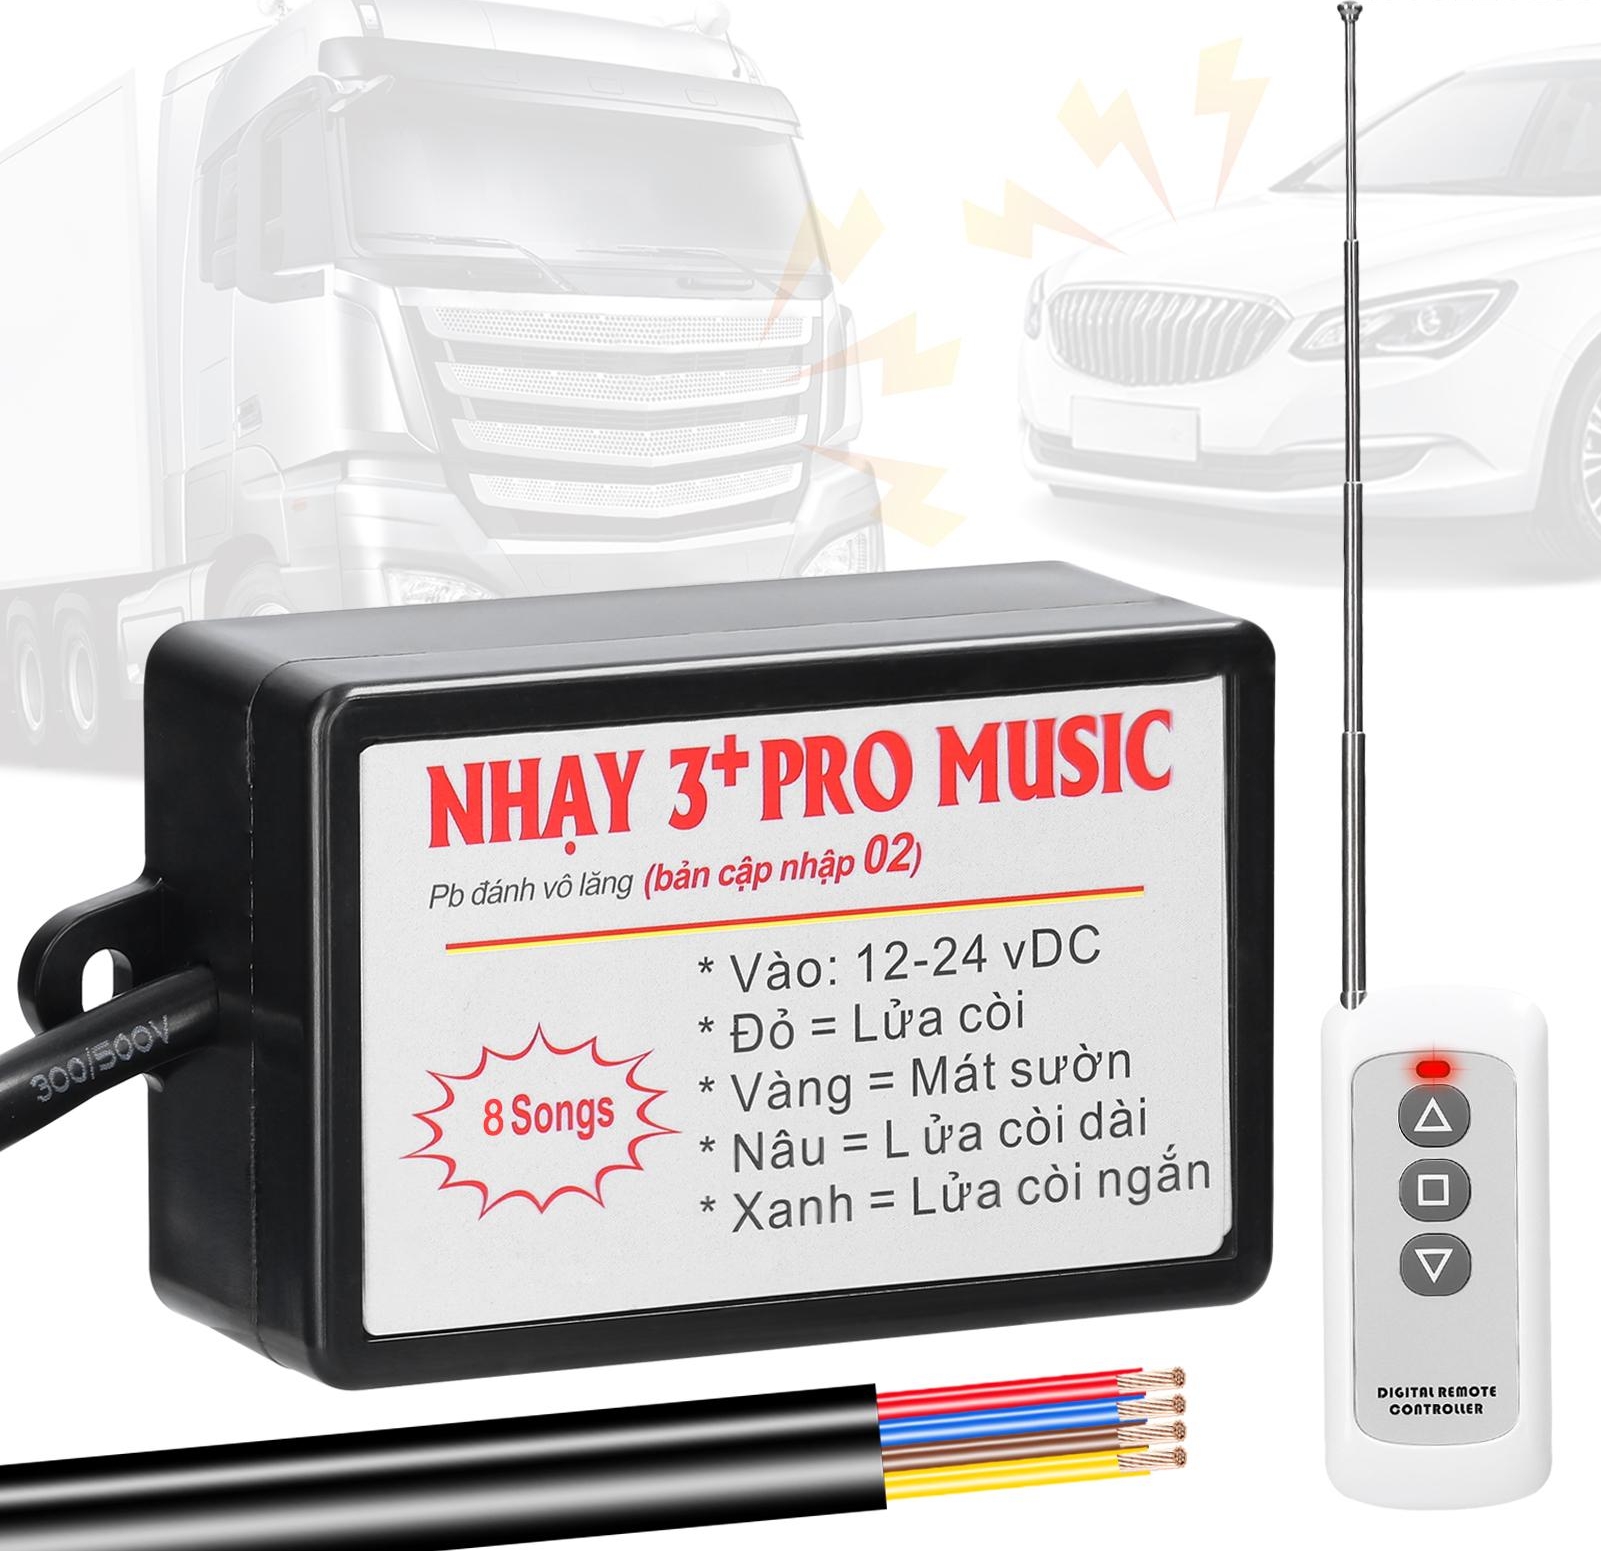 Nhay 3+ Pro Music Rapid Horn Relay Car Horn Controller Air Speaker Sound Control Unit 12 Sound for Car Truck Marine Boat